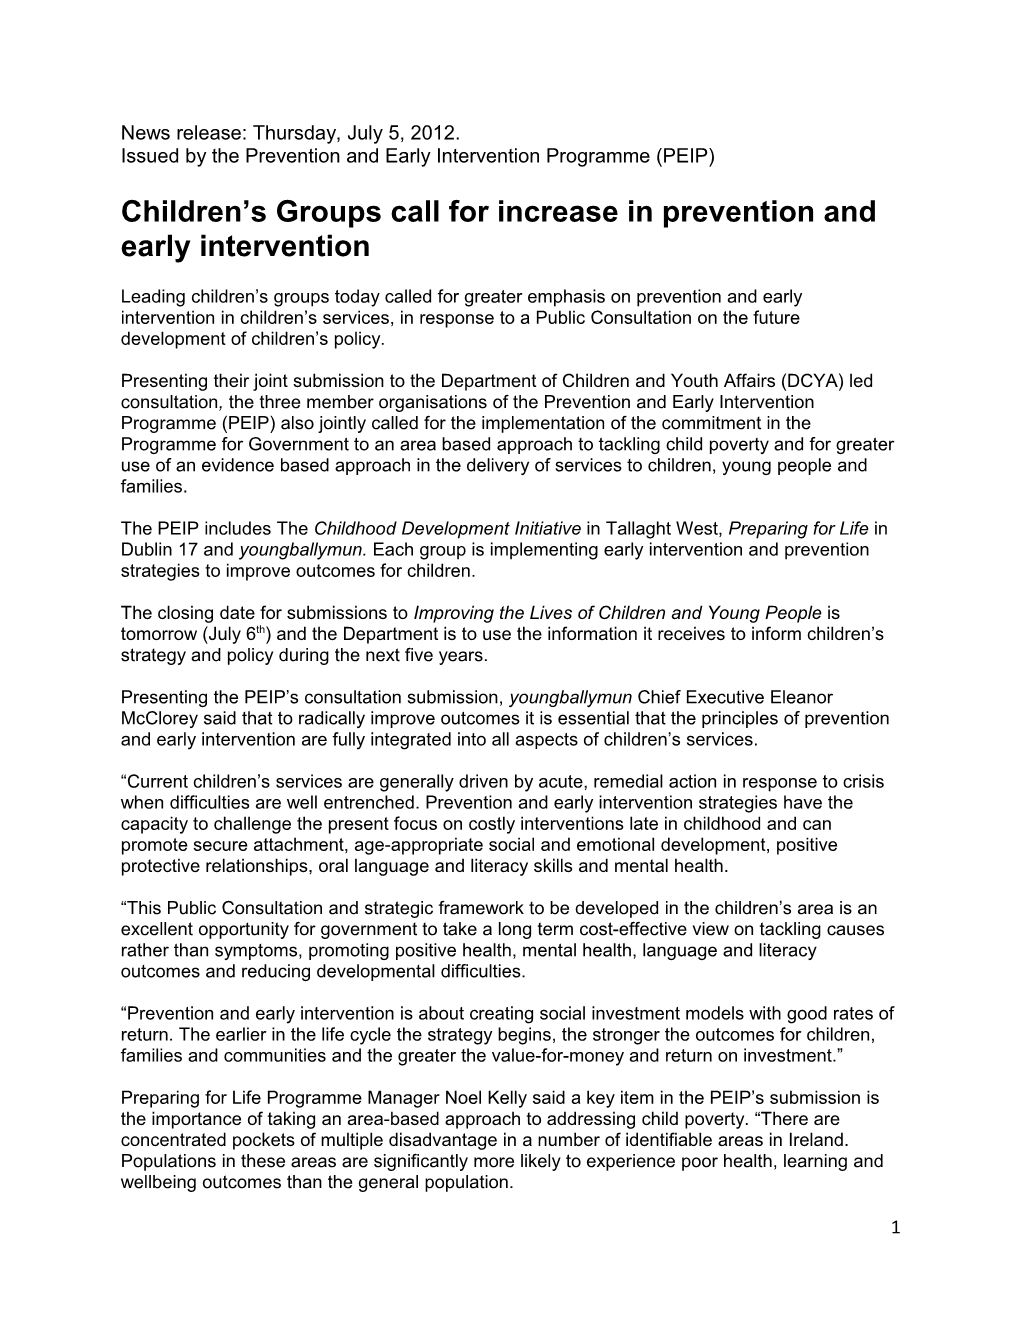 Children S Groups Call for Increase in Prevention and Early Intervention